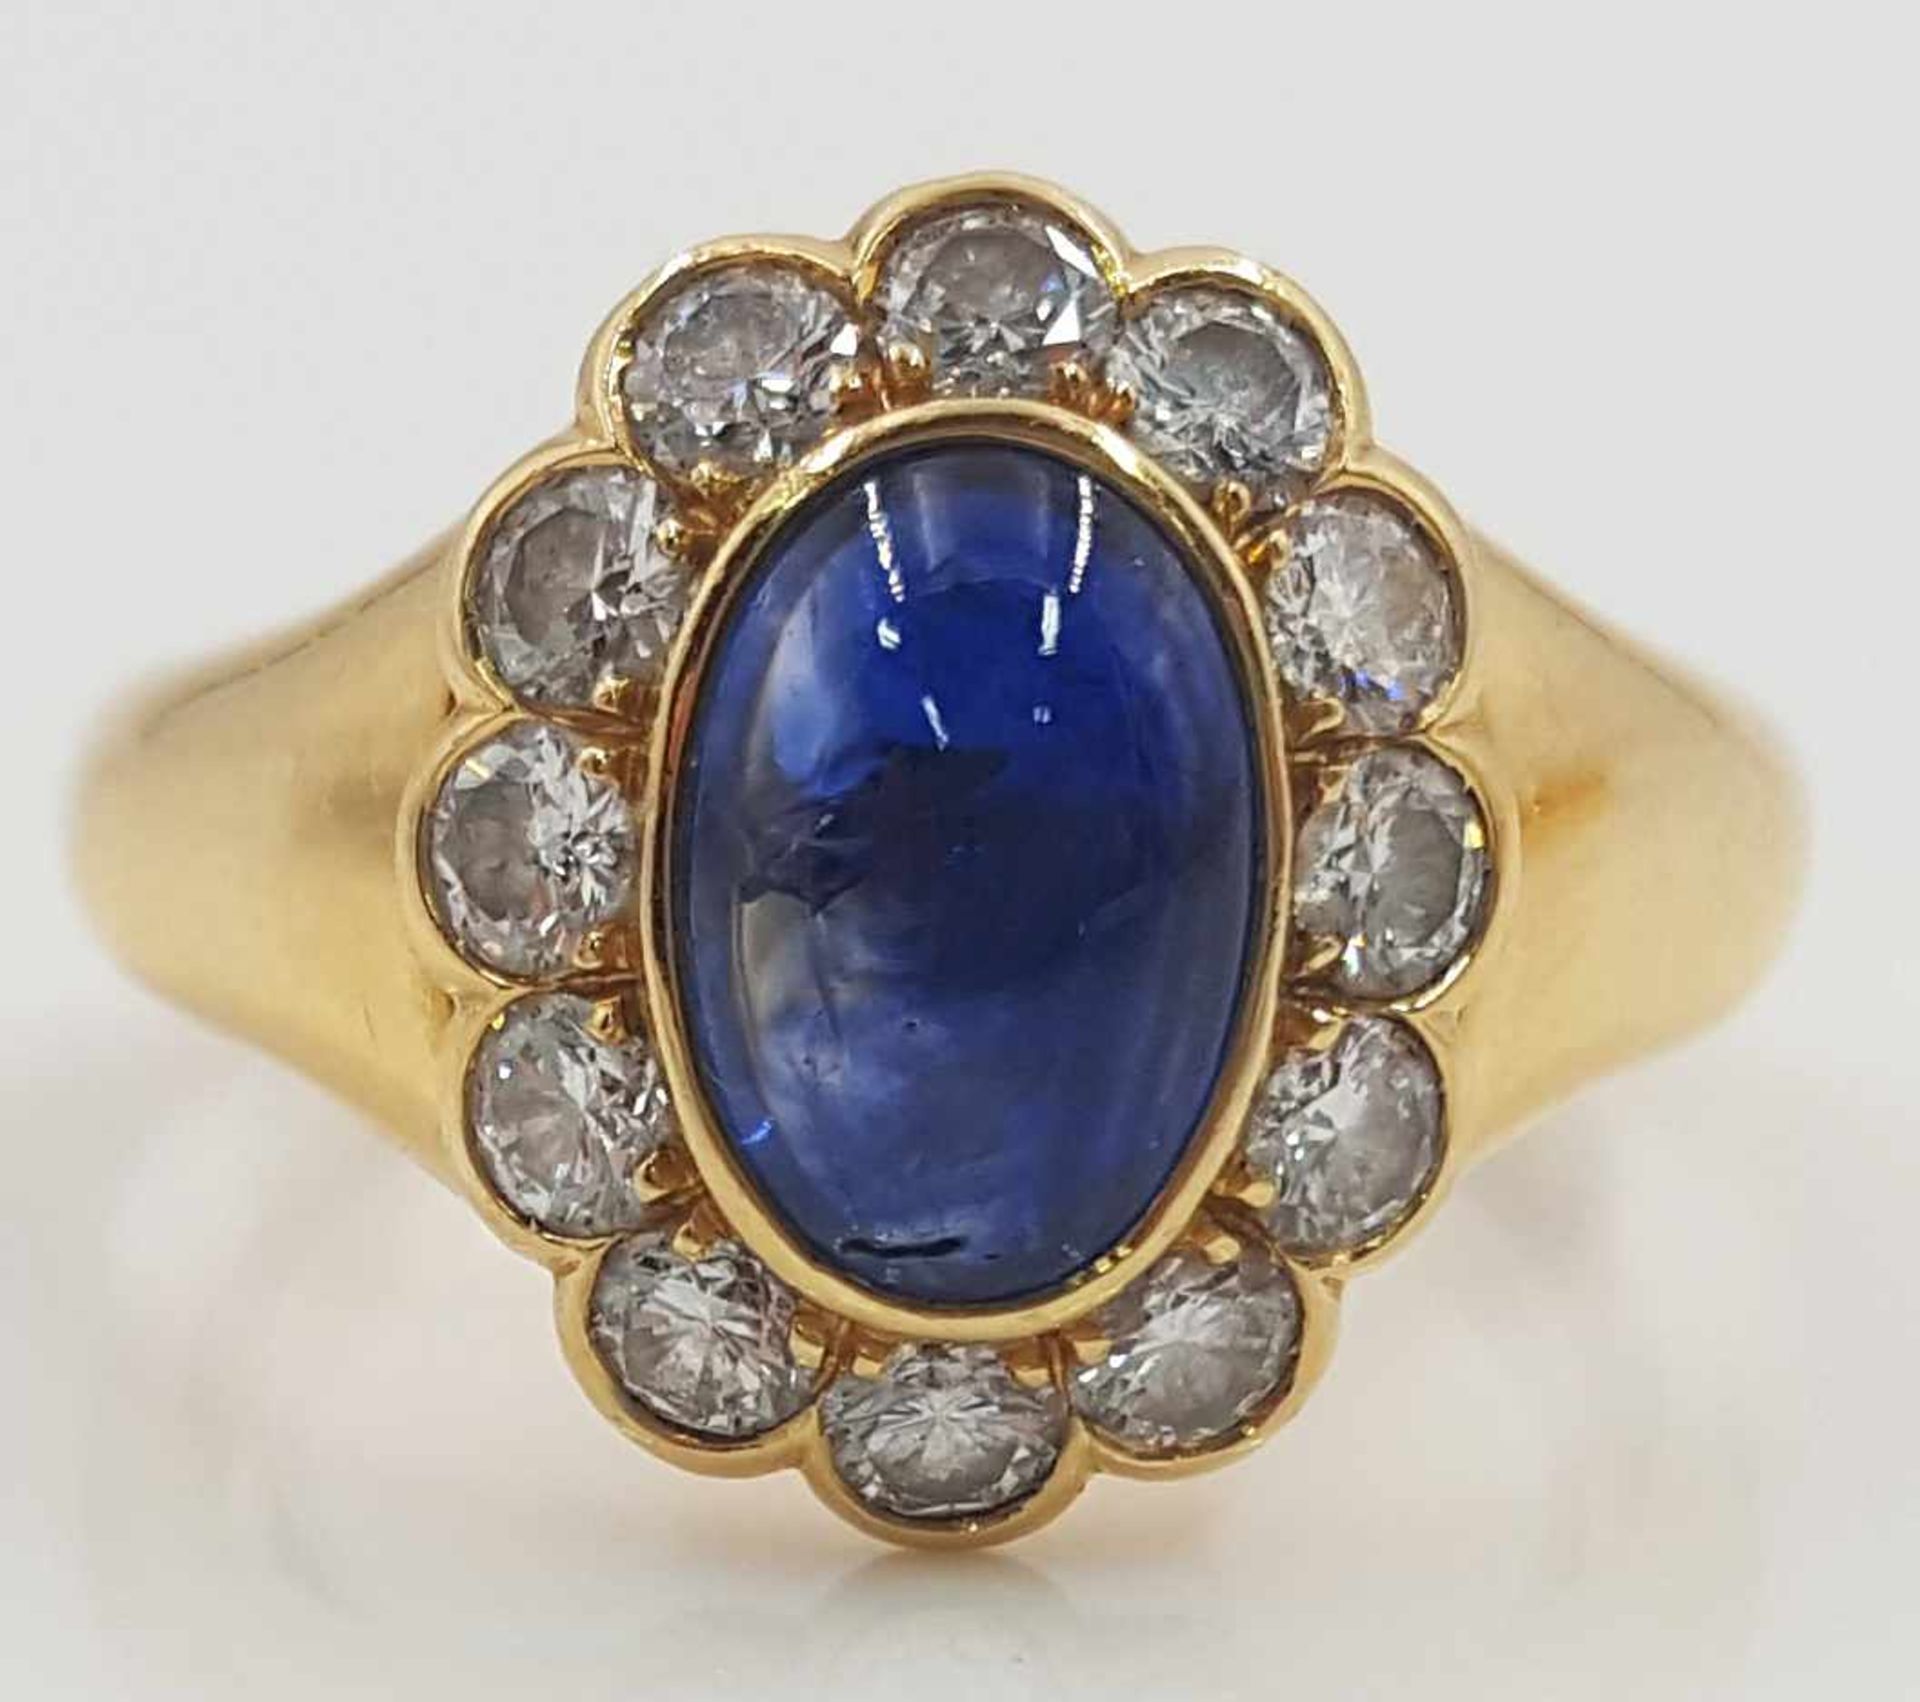 Yellow gold 750 ring with a Sapphire cabochon framed by 12 diamonds.